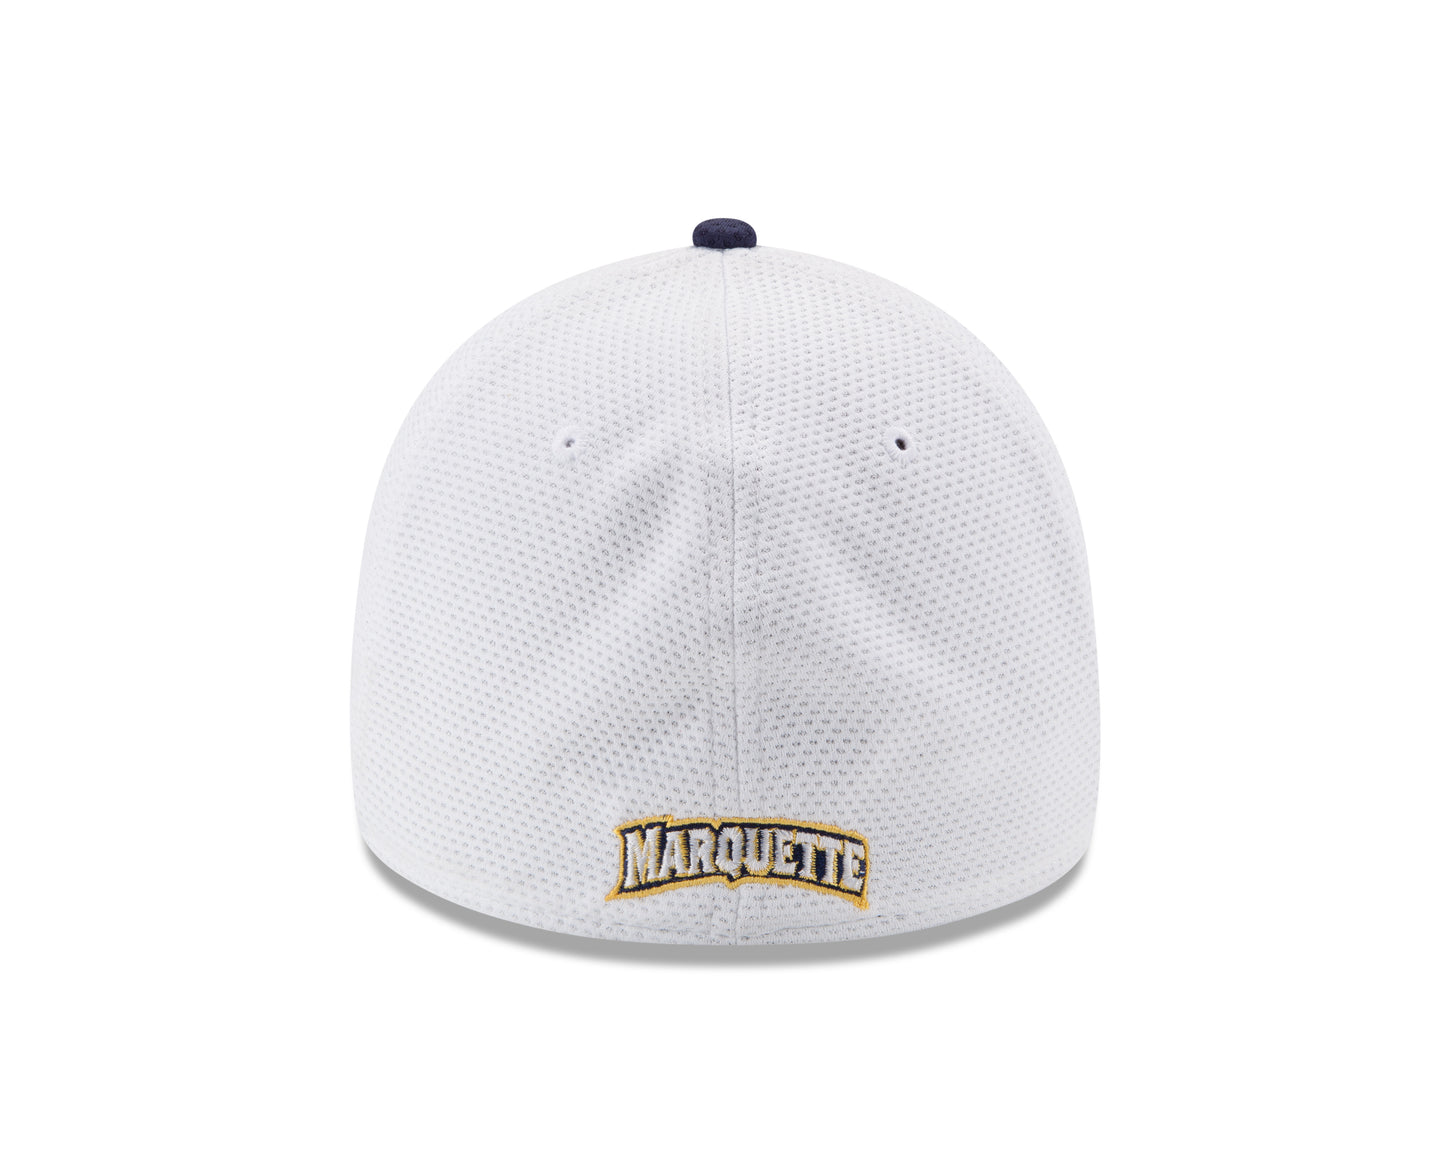 Marquette Golden Eagles New Era White Training Classic 39THIRTY Flex Fit Hat